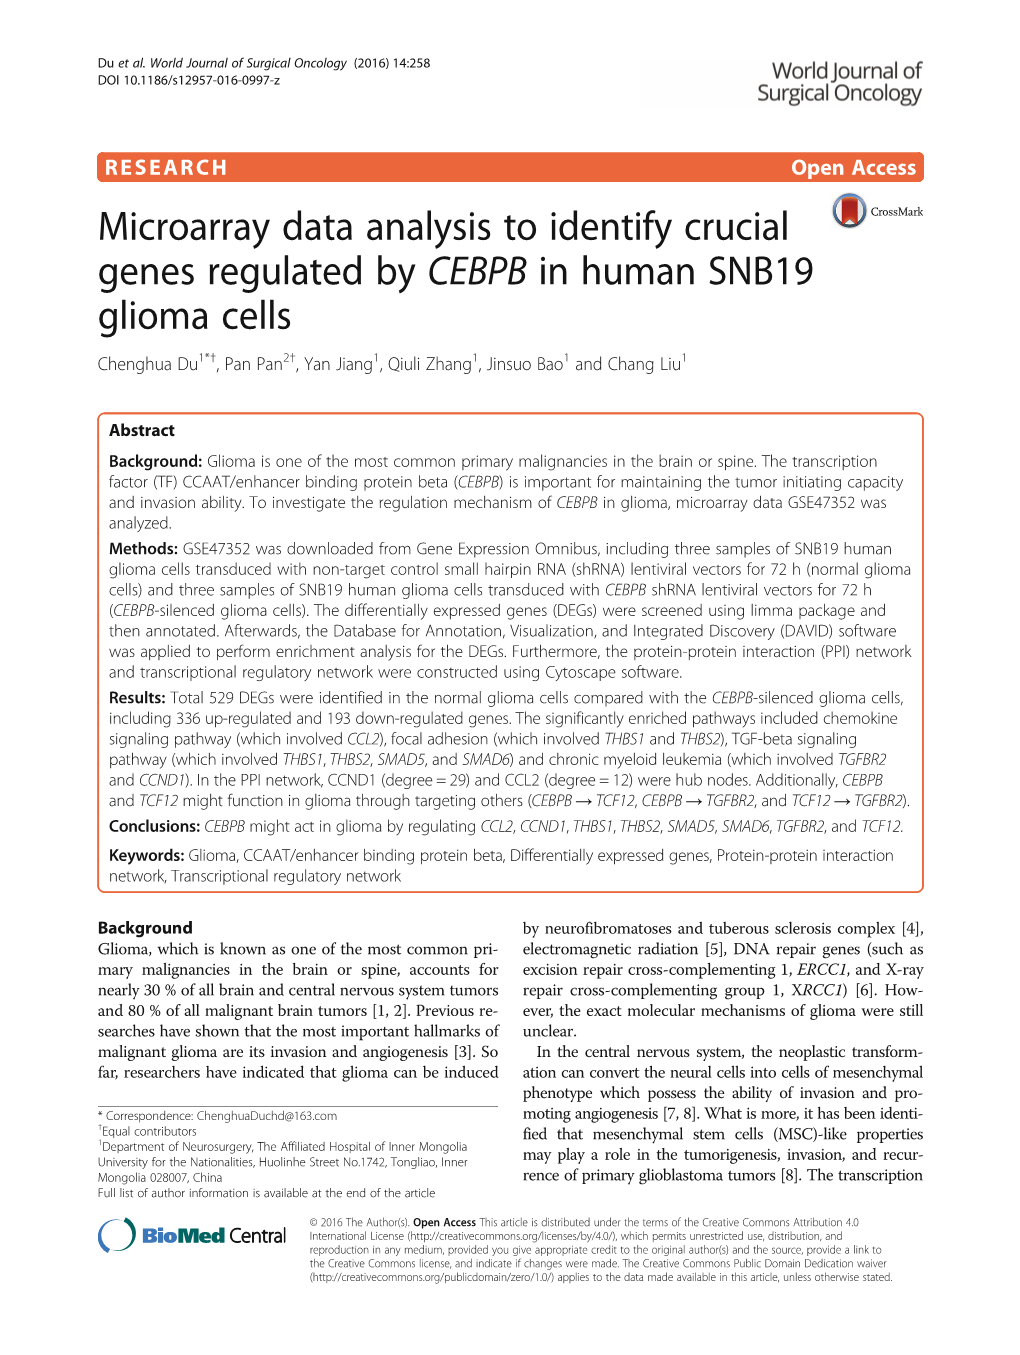 Microarray Data Analysis to Identify Crucial Genes Regulated by CEBPB in Human SNB19 Glioma Cells